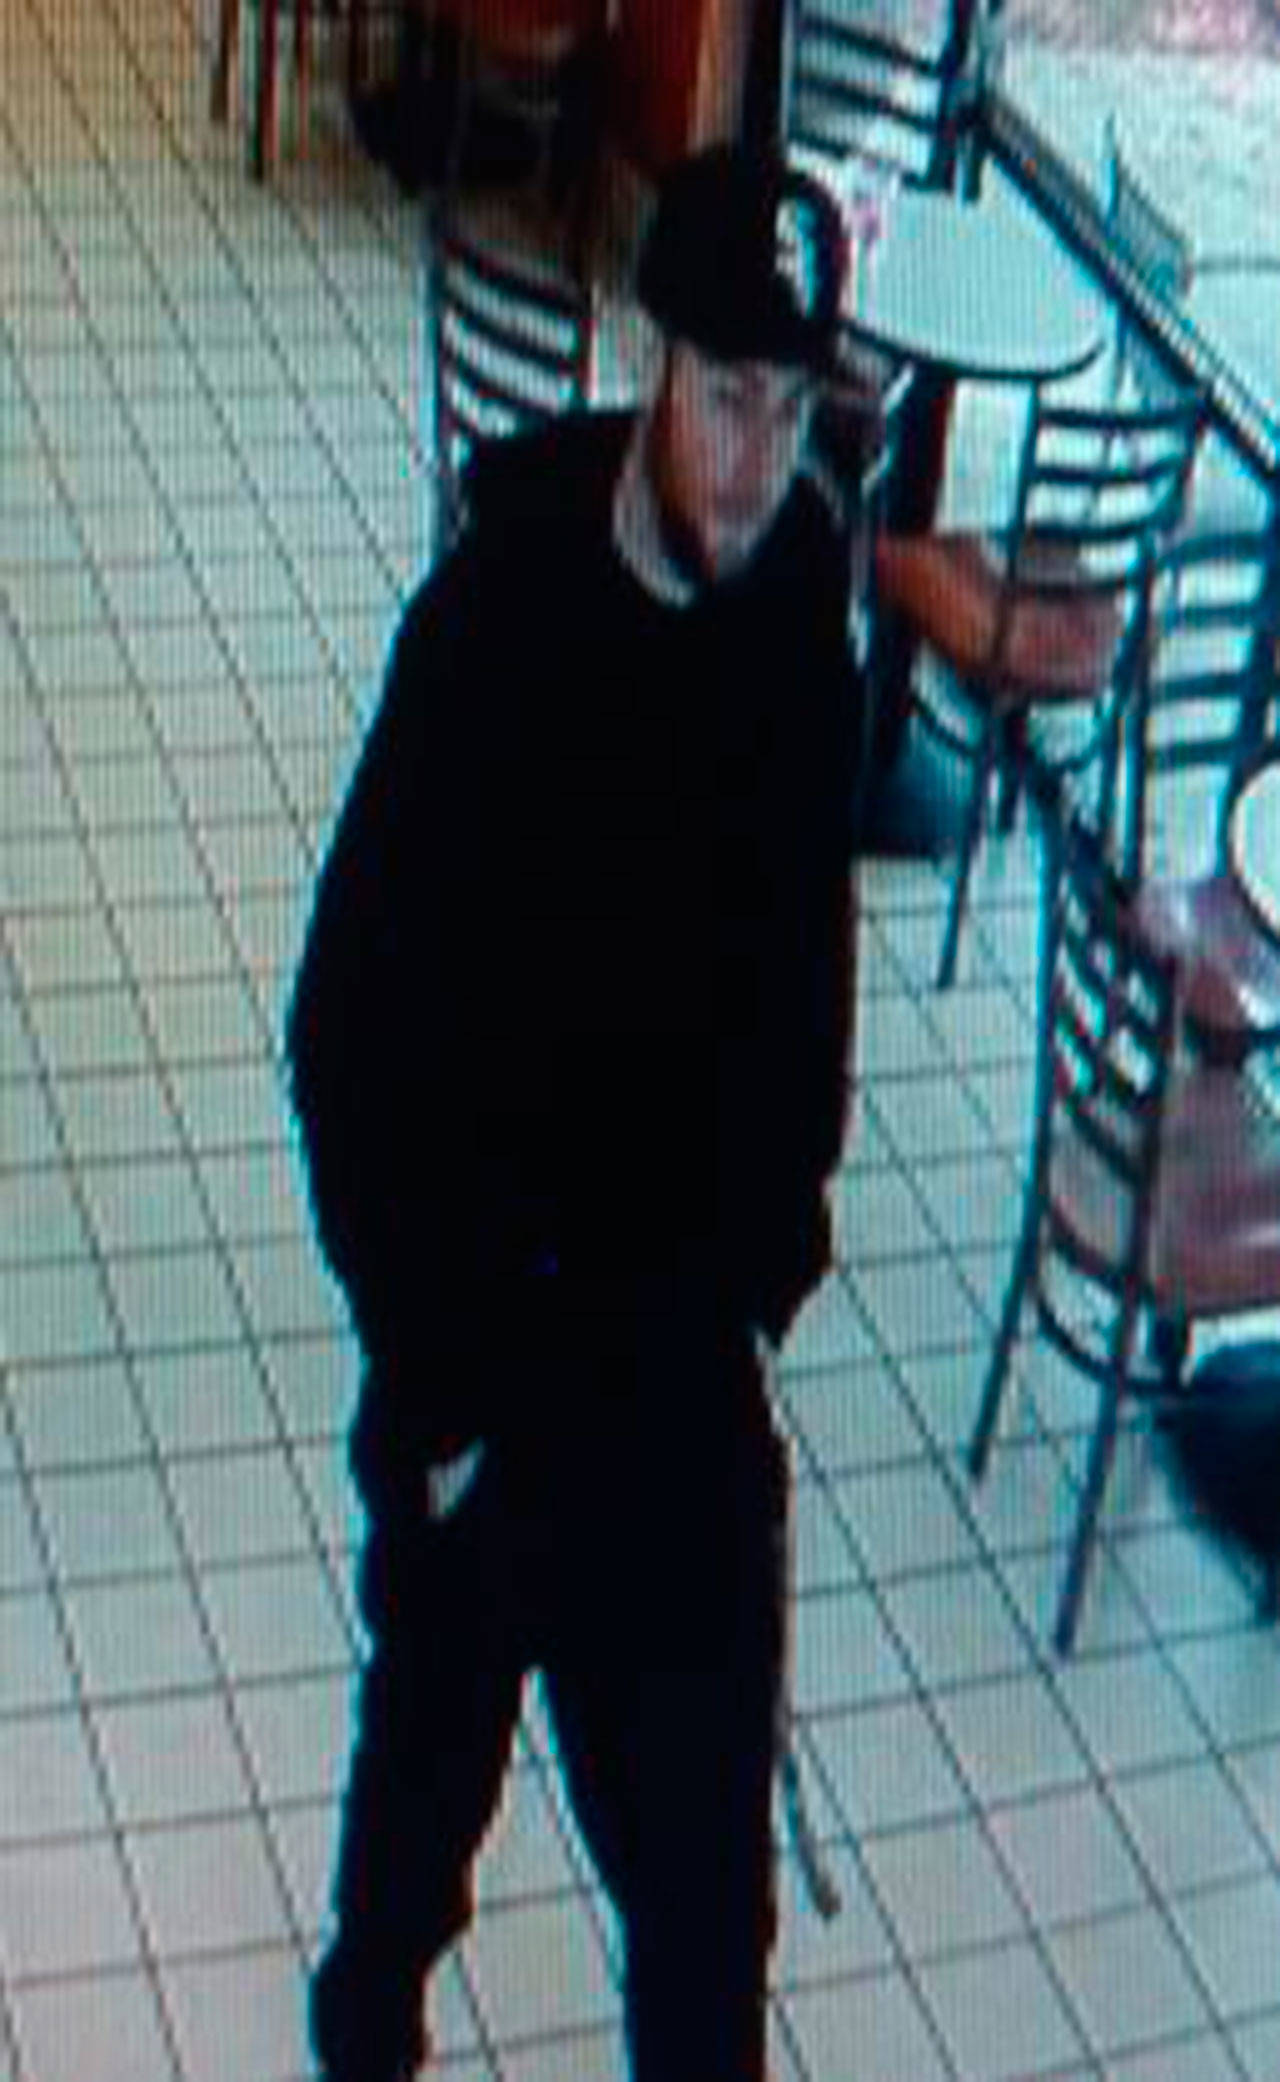 Mill Creek police are seeking this man in a robbery of a Baskin Robbins on Tuesday. (Courtesy of City of Mill Creek)